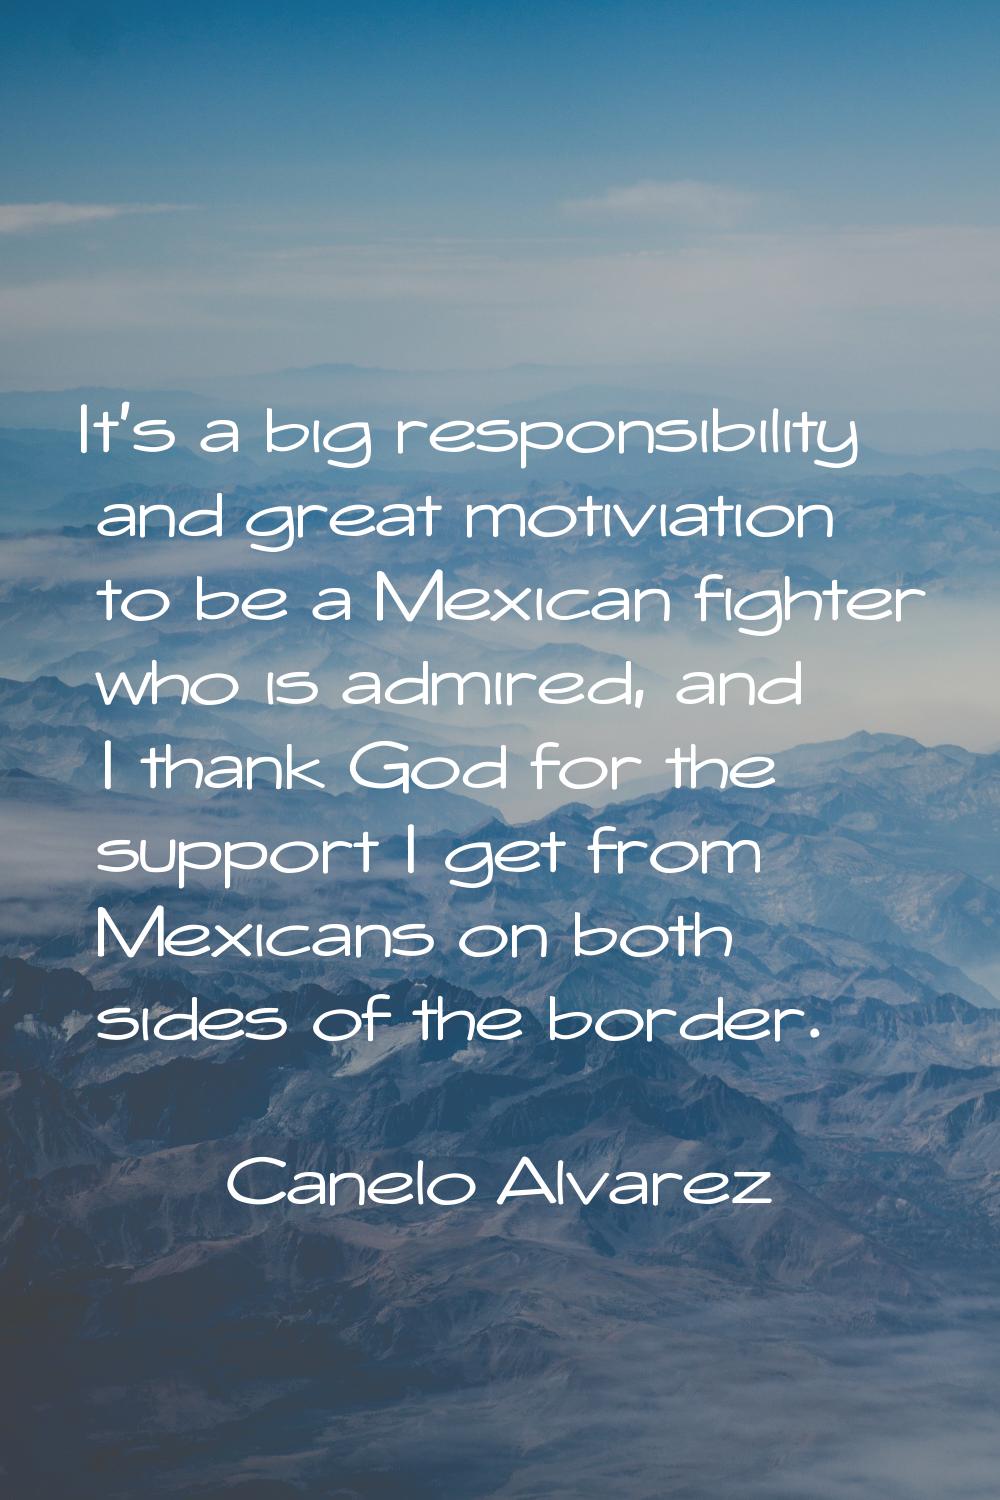 It's a big responsibility and great motiviation to be a Mexican fighter who is admired, and I thank